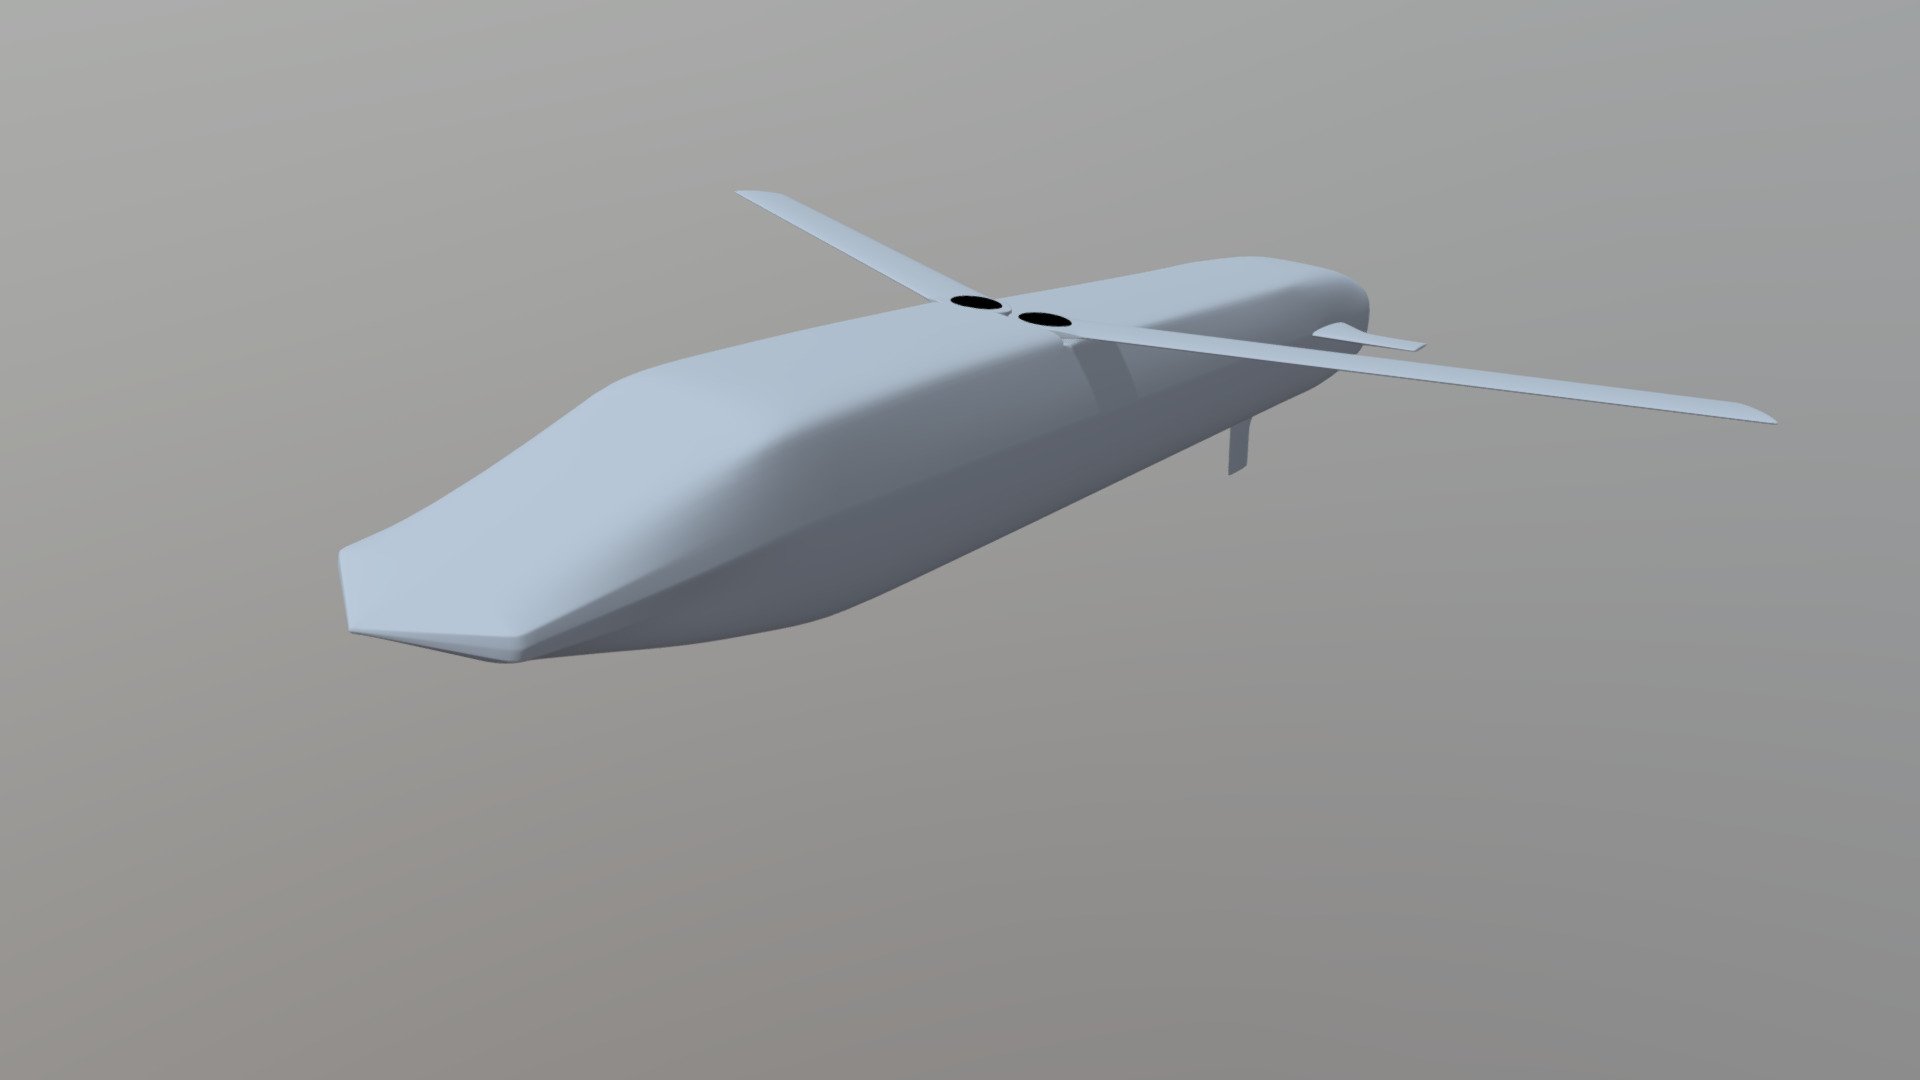 The low-flying stealthy subsonic standoff weapon that draws on experience with the current Storm Shadow/Scalp but has a much longer-range capability of more than 1,000 km and penetrating capability against deeply buried targets 3d model